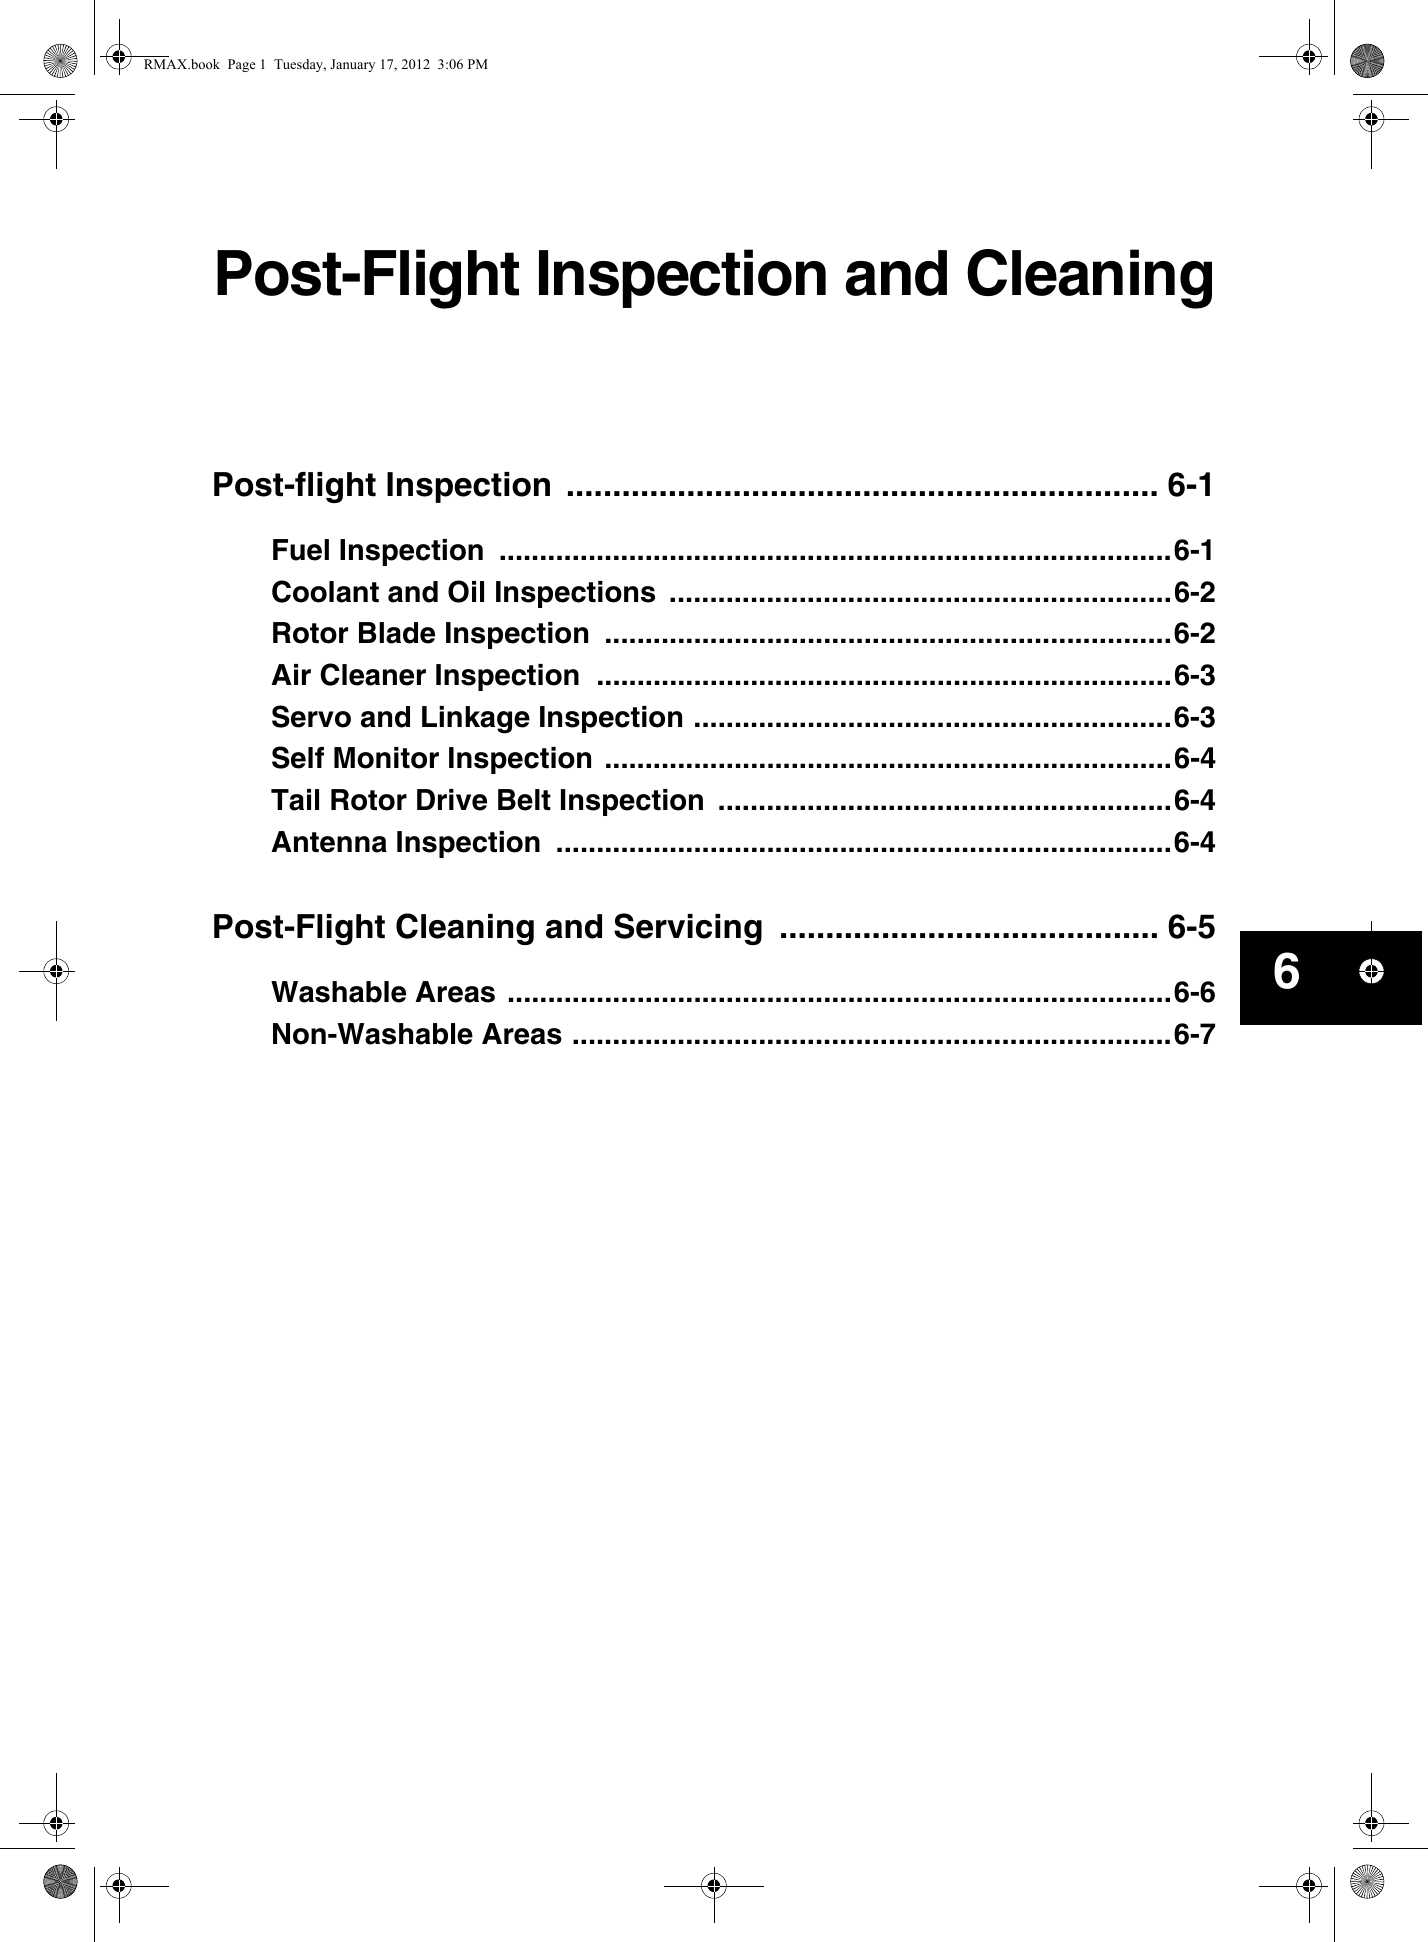 Post-Flight Inspection and CleaningPost-flight Inspection  ................................................................ 6-1Fuel Inspection  ...................................................................................6-1Coolant and Oil Inspections  ..............................................................6-2Rotor Blade Inspection  ......................................................................6-2Air Cleaner Inspection  .......................................................................6-3Servo and Linkage Inspection ...........................................................6-3Self Monitor Inspection ......................................................................6-4Tail Rotor Drive Belt Inspection  ........................................................6-4Antenna Inspection  ............................................................................6-4Post-Flight Cleaning and Servicing  ......................................... 6-5Washable Areas ..................................................................................6-6Non-Washable Areas ..........................................................................6-76RMAX.book  Page 1  Tuesday, January 17, 2012  3:06 PM